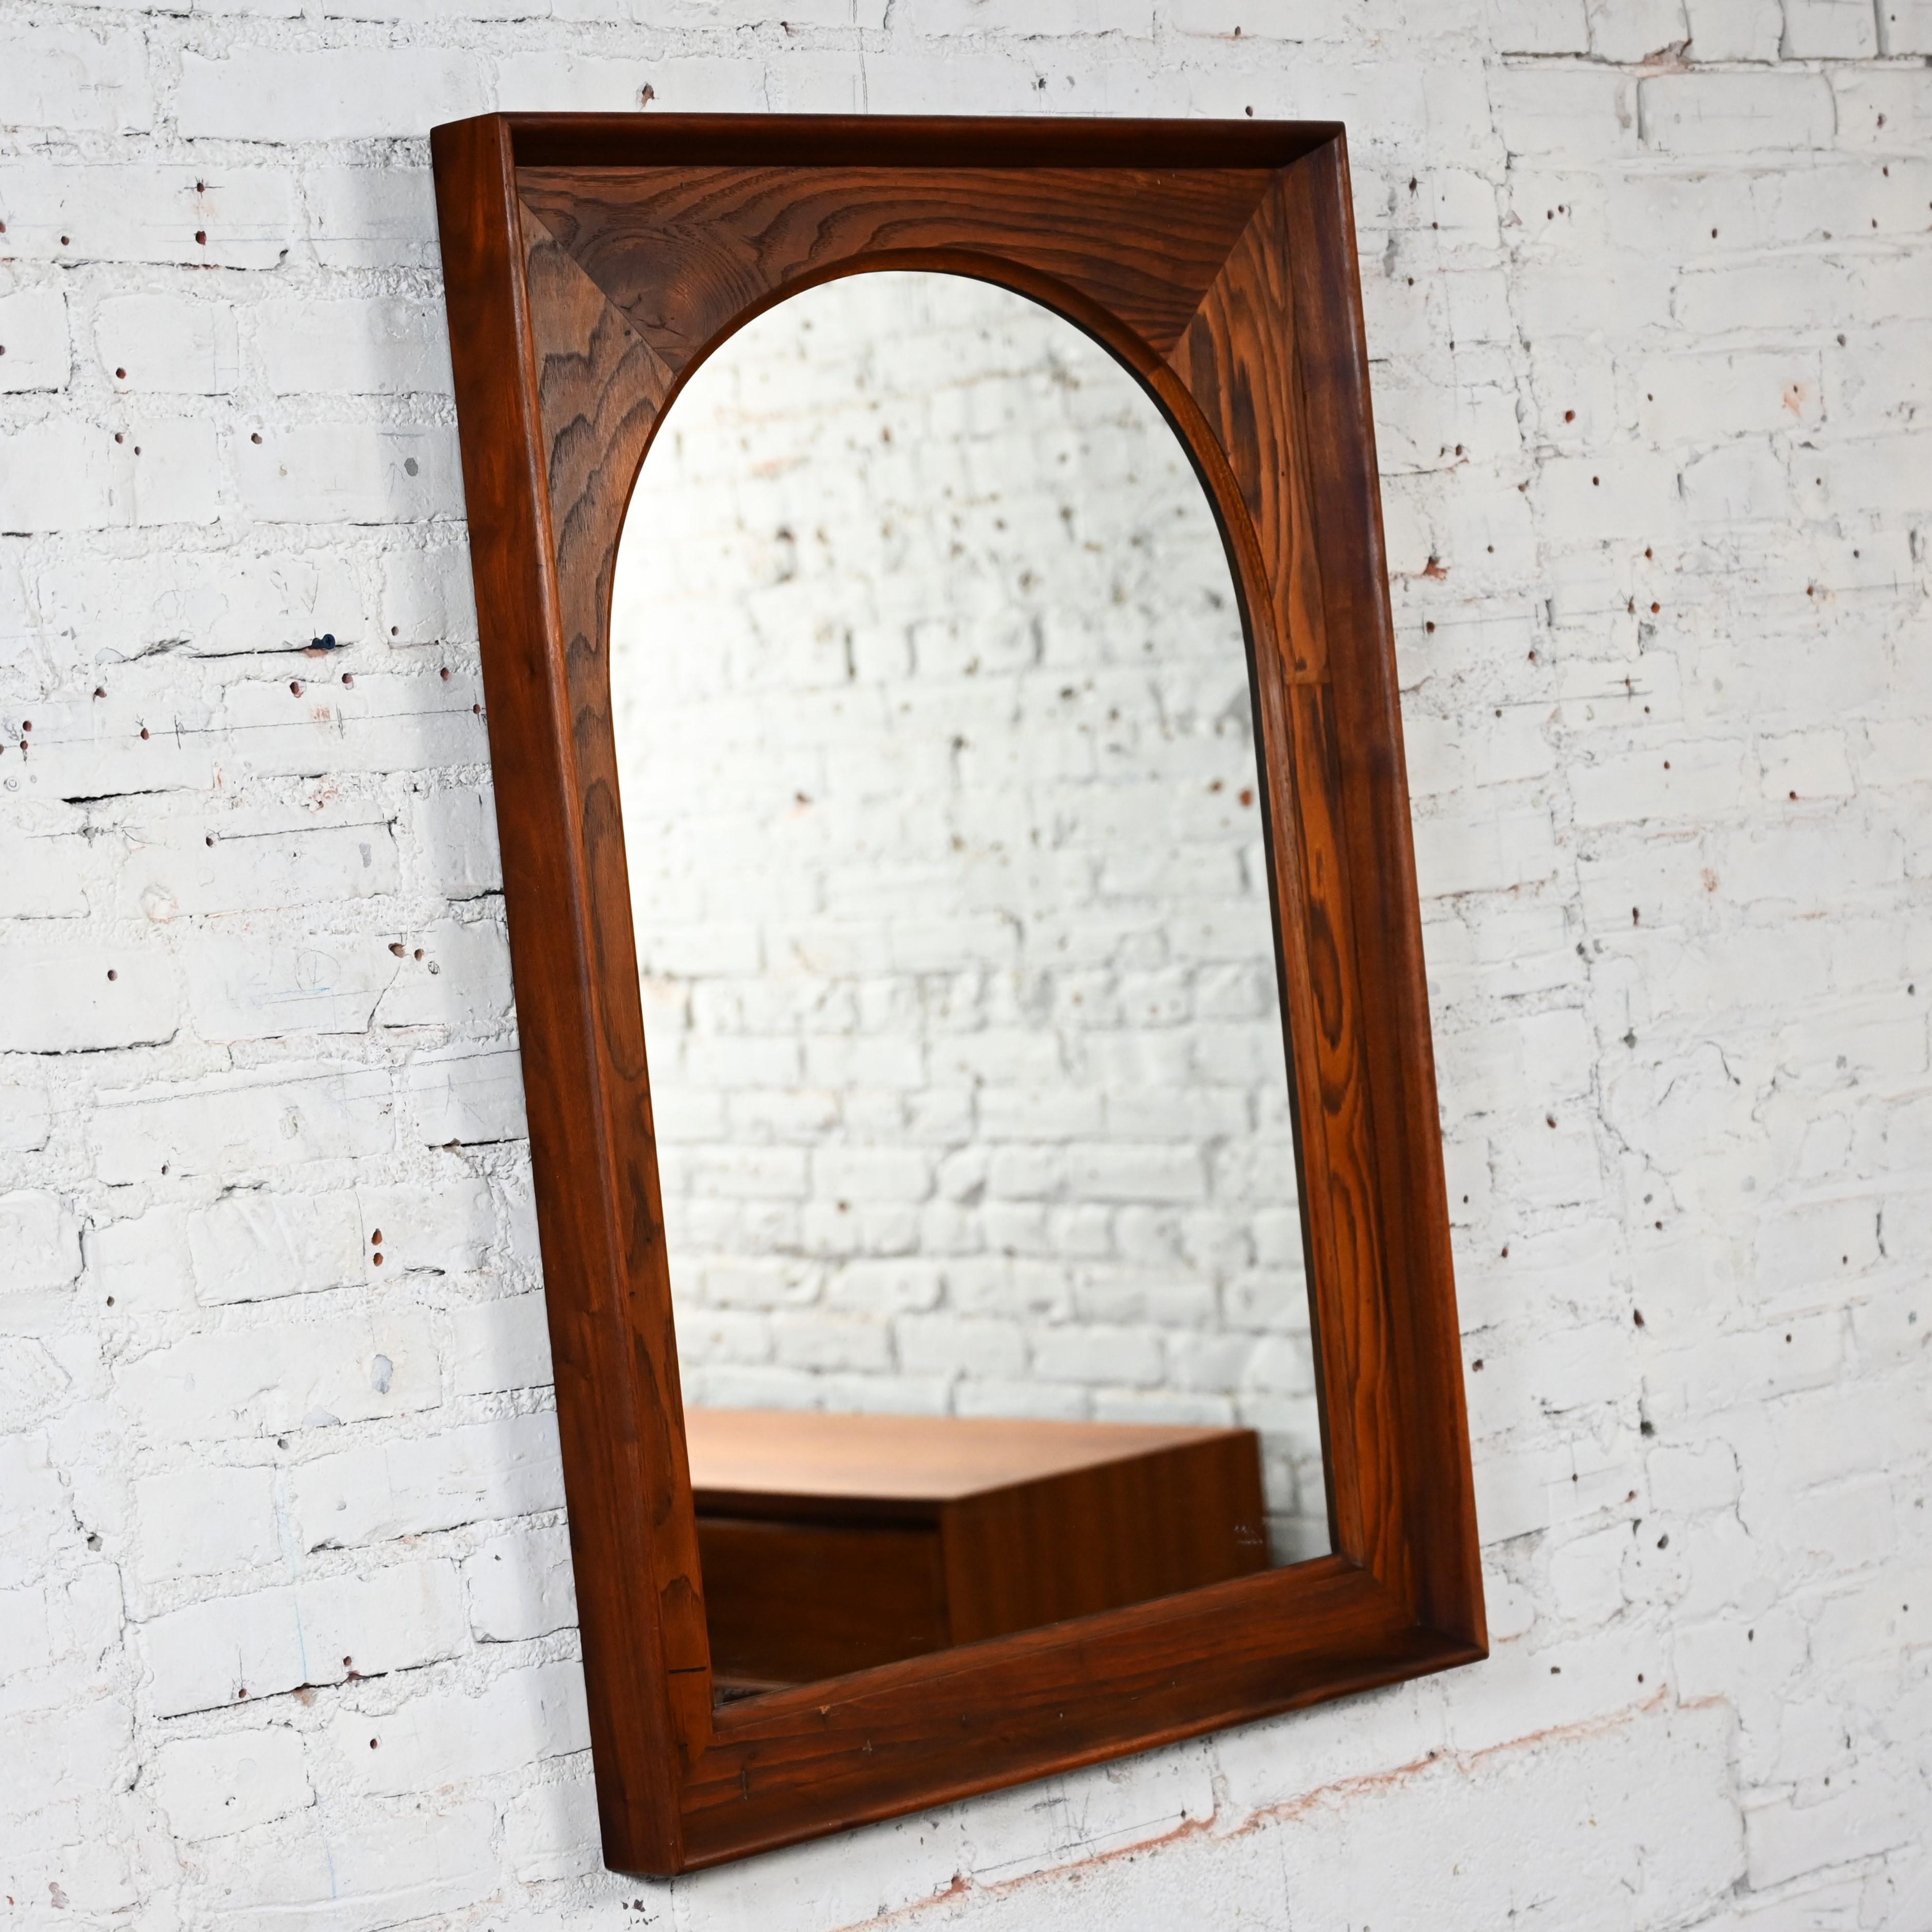 Mid Century Modern Framed Arch Mirror by Dillingham Pecky Cypress Walnut Trim In Good Condition For Sale In Topeka, KS